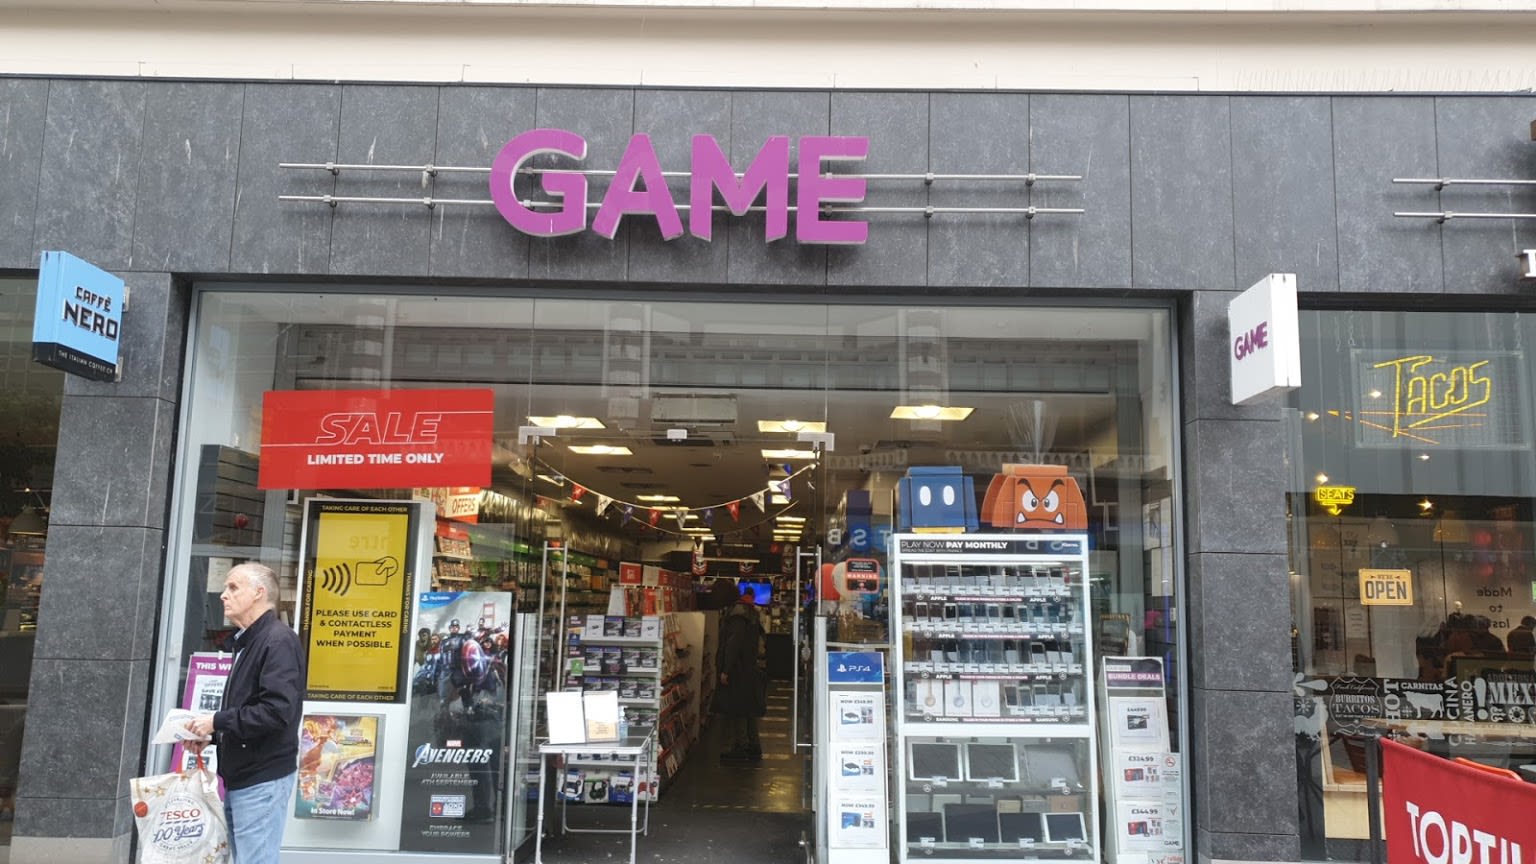 GAME Liverpool (Lord St)